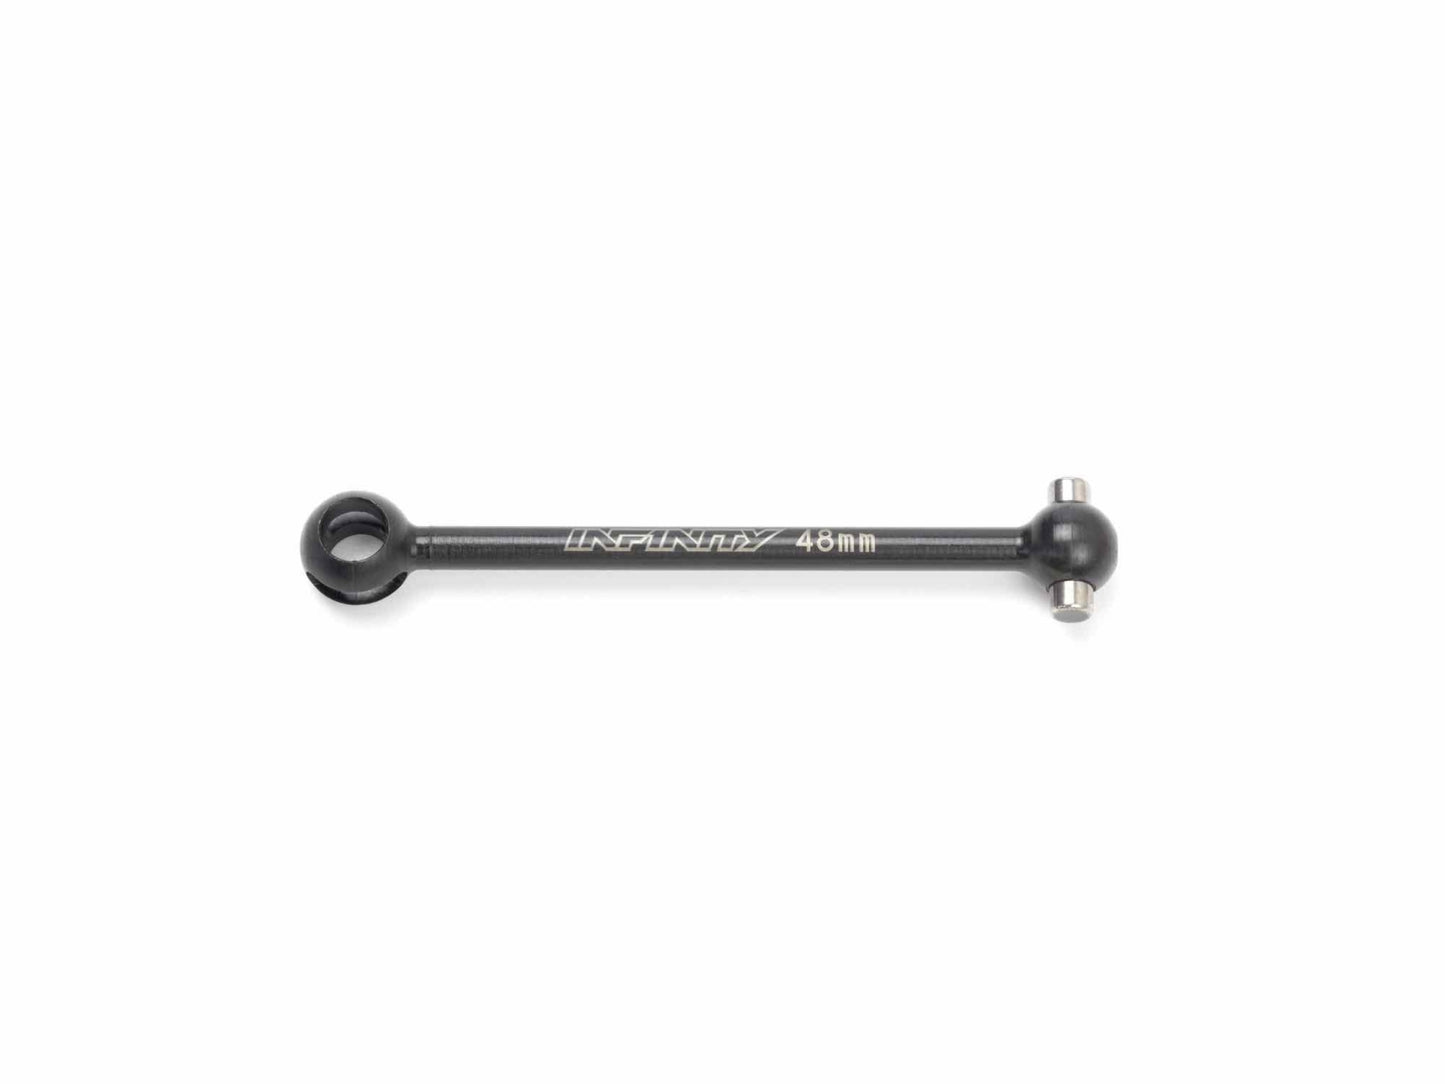 G165 - FRONT UNIVERSAL SHAFT (Parallel/48mm)